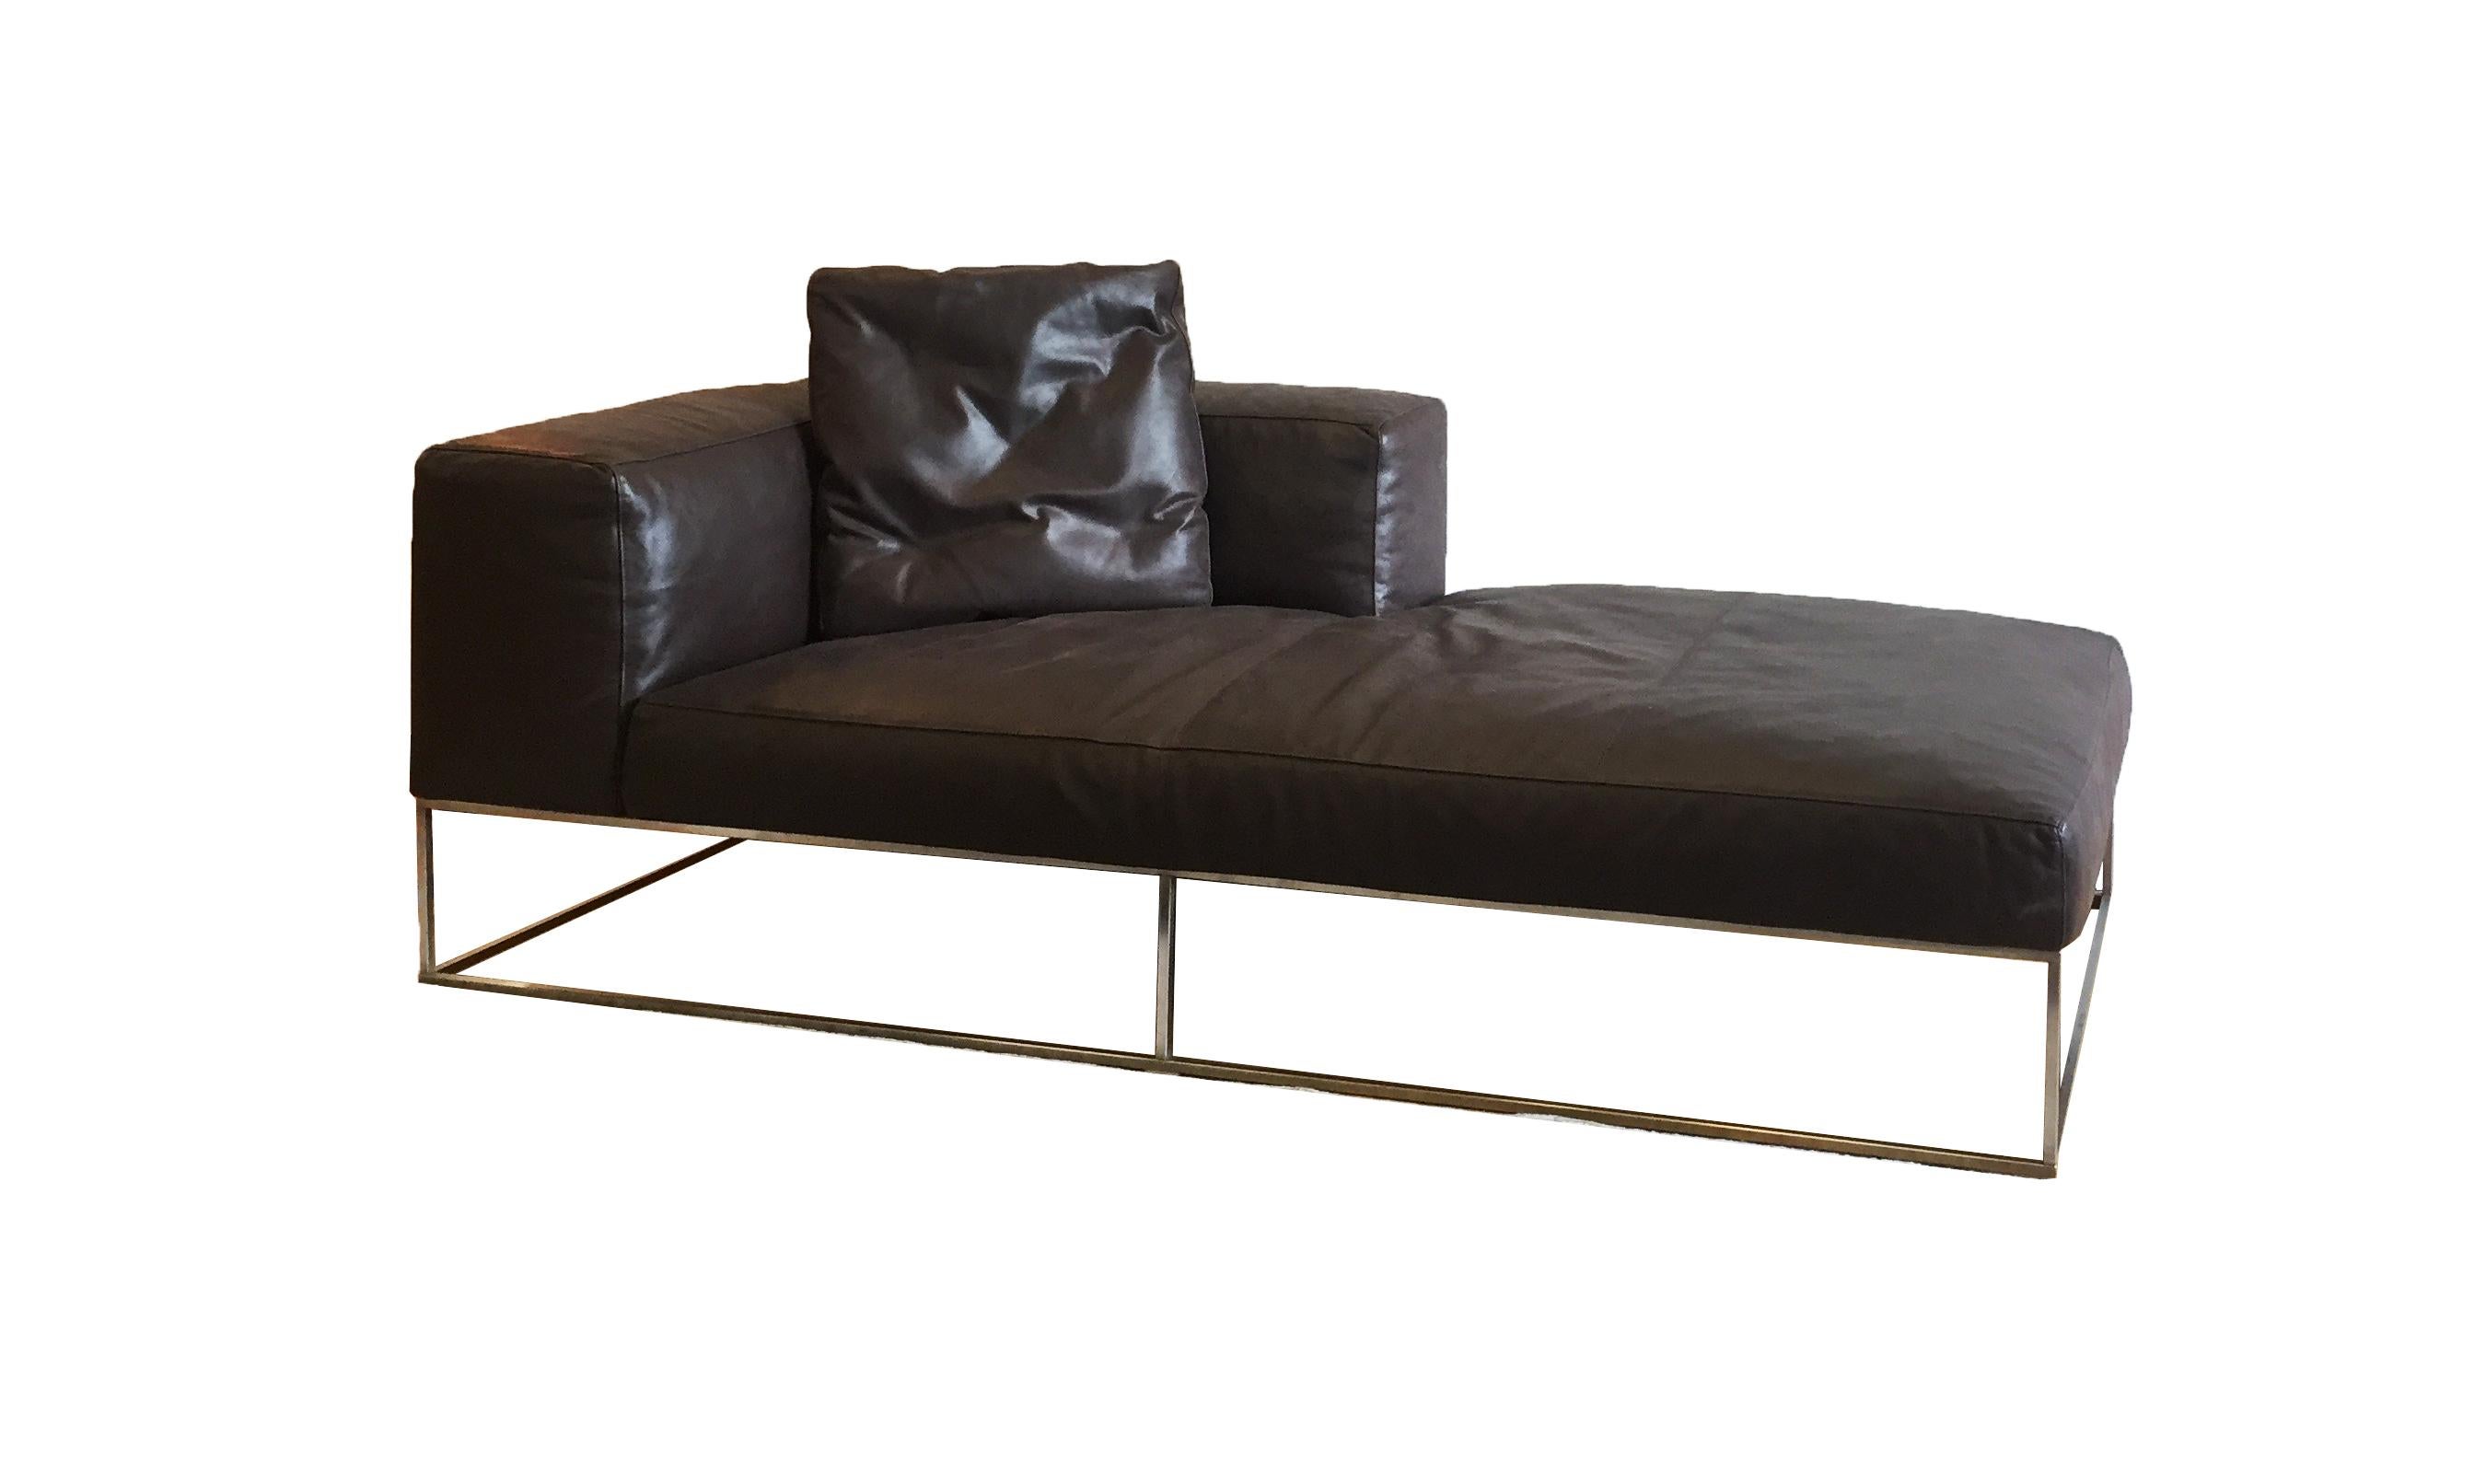 Ile Club chaise upholstered in dark brown leather with down-filled cushion and legs in steel. A perfect addition to any living modern living room. Designed by Piero Lissoni in 2007.

Dimensions: 74”W x 37”D x 26”H x SH 14.6”. Showroom sample that